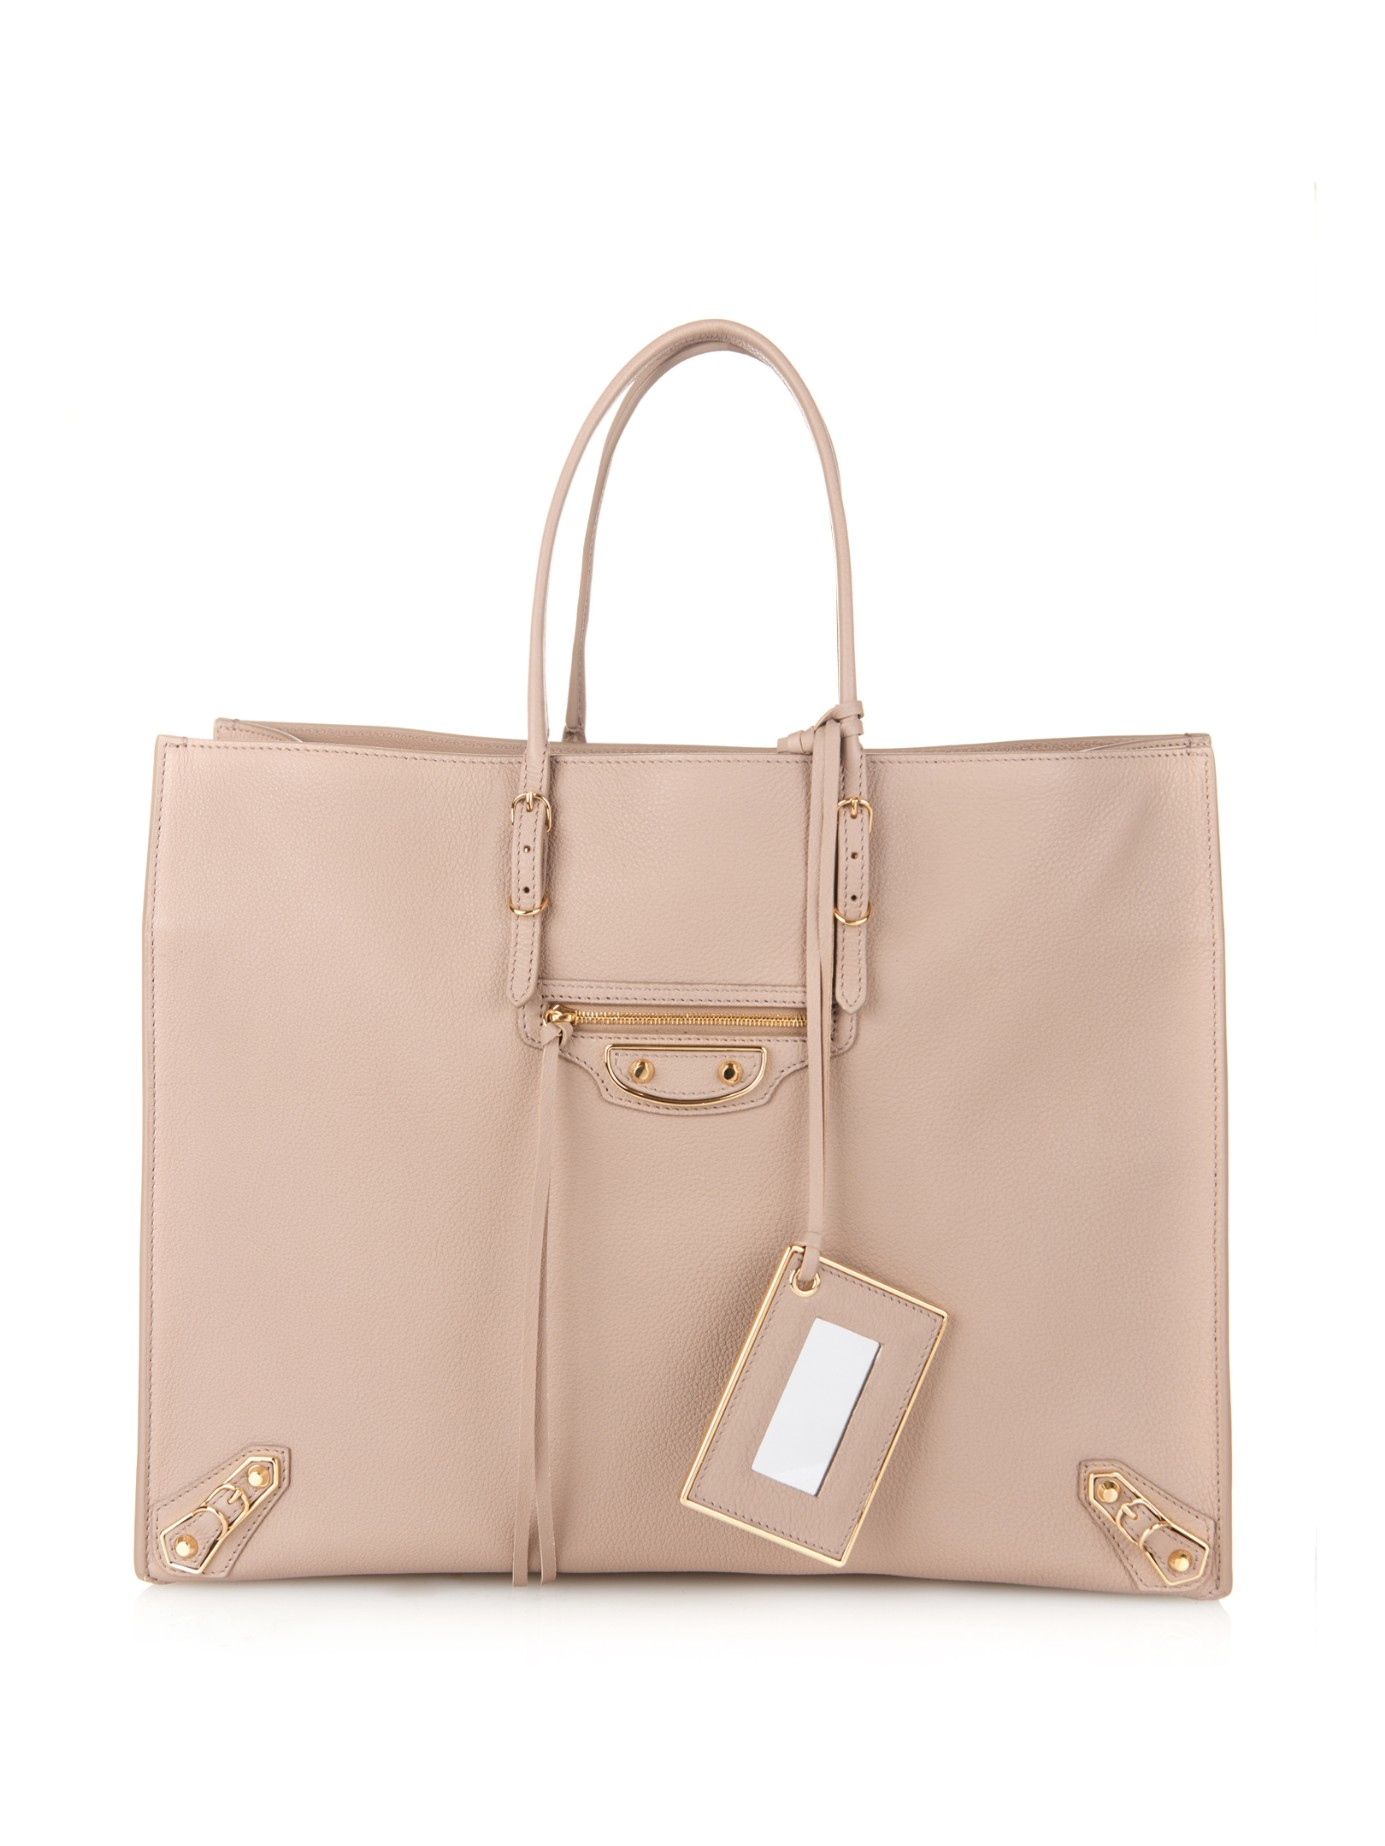 Balenciaga Papier A4 Leather Tote in Natural | Lyst